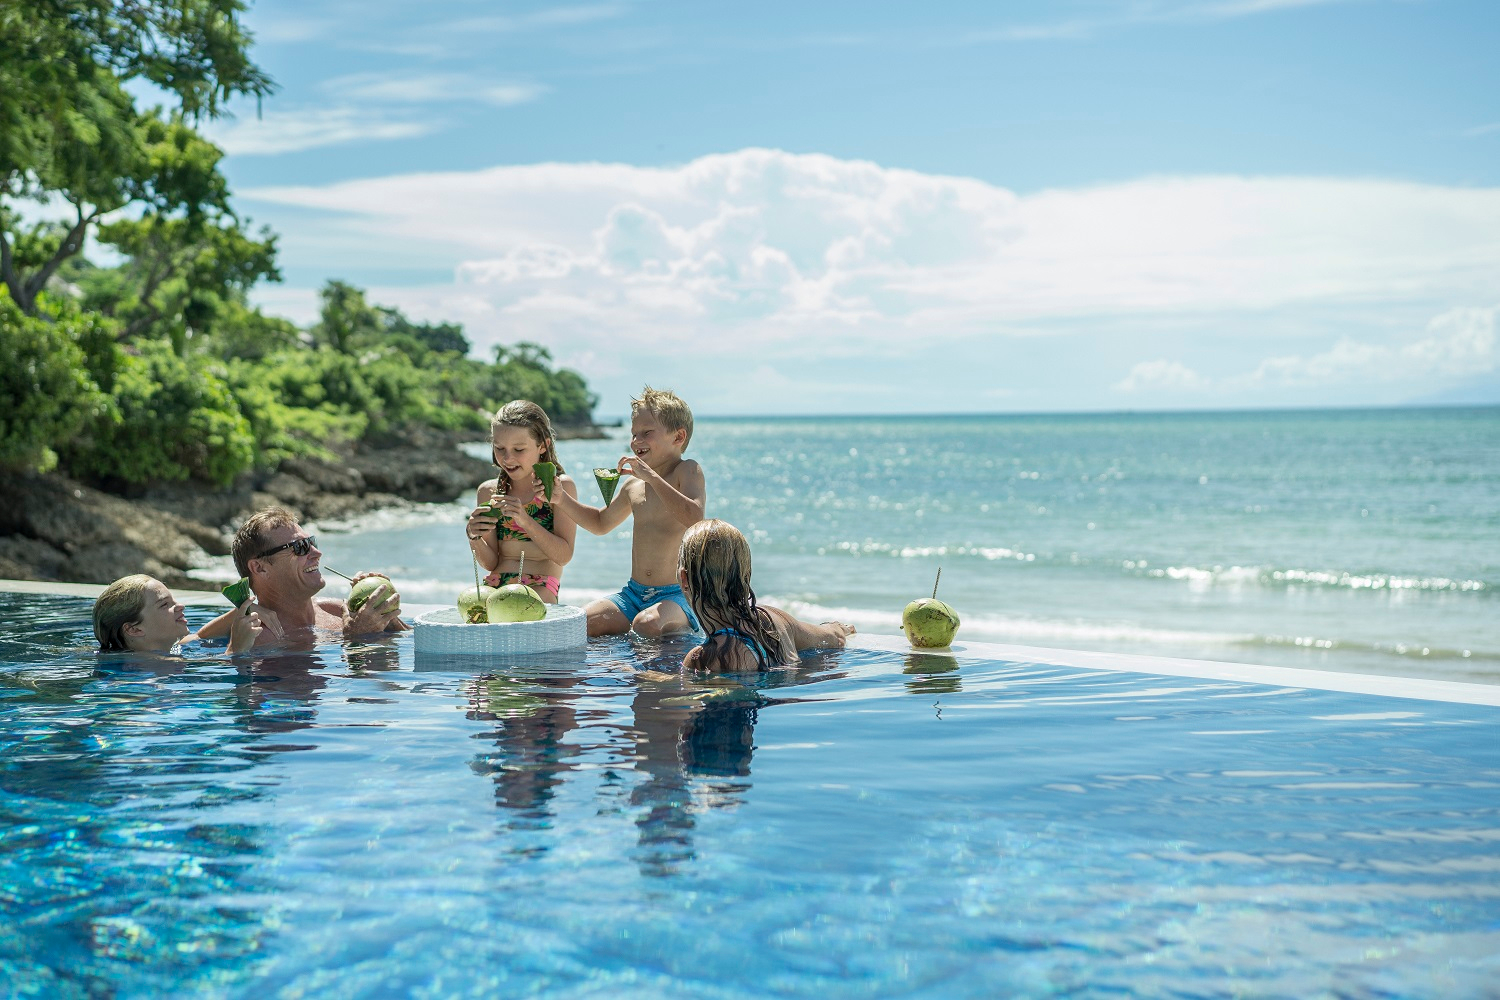 , 9 hotels and resorts to celebrate Easter weekend in Bali and Jakarta